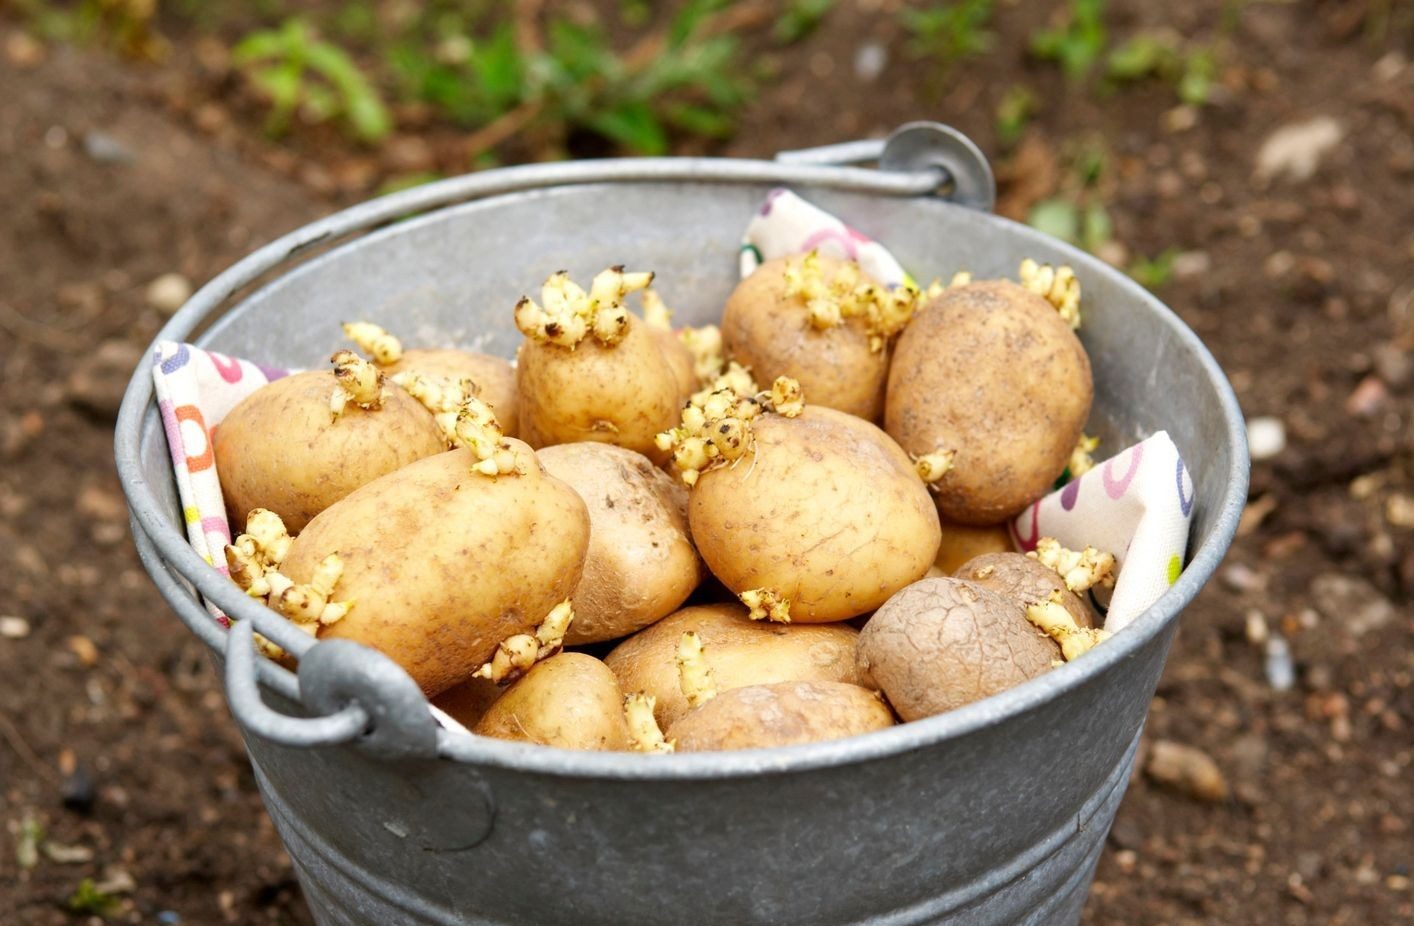 Sprouted potatoes for planting